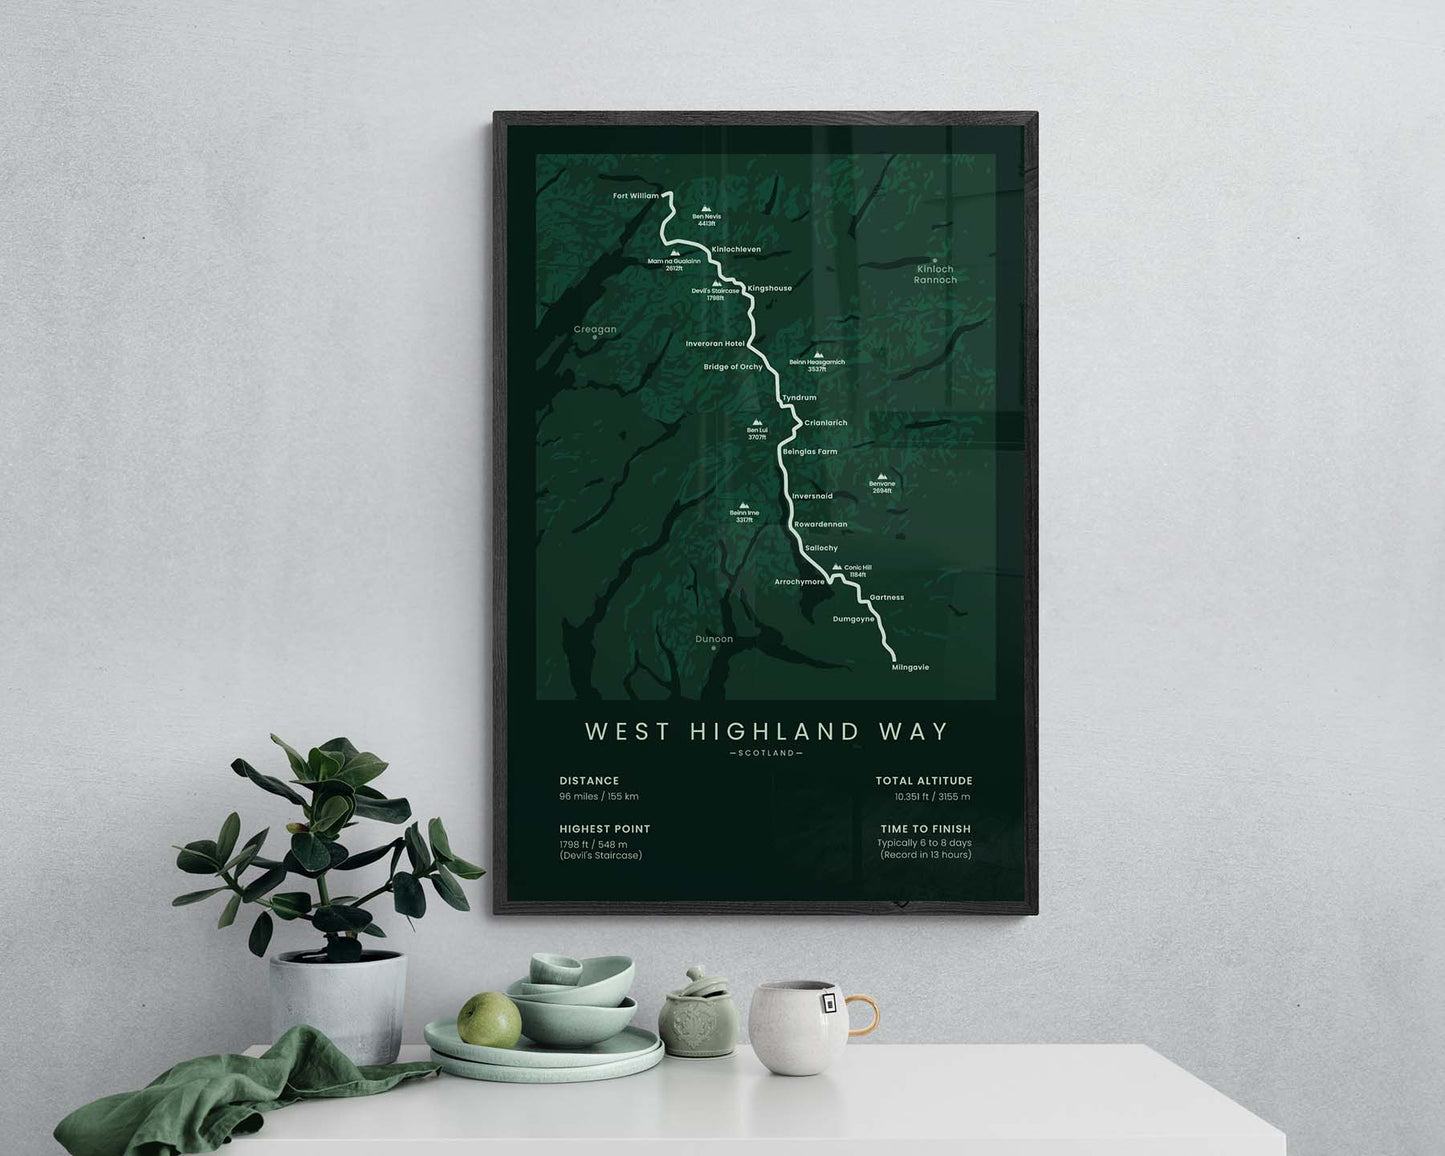 West Highland Way in Scottish Highlands walking track print with green background in living room